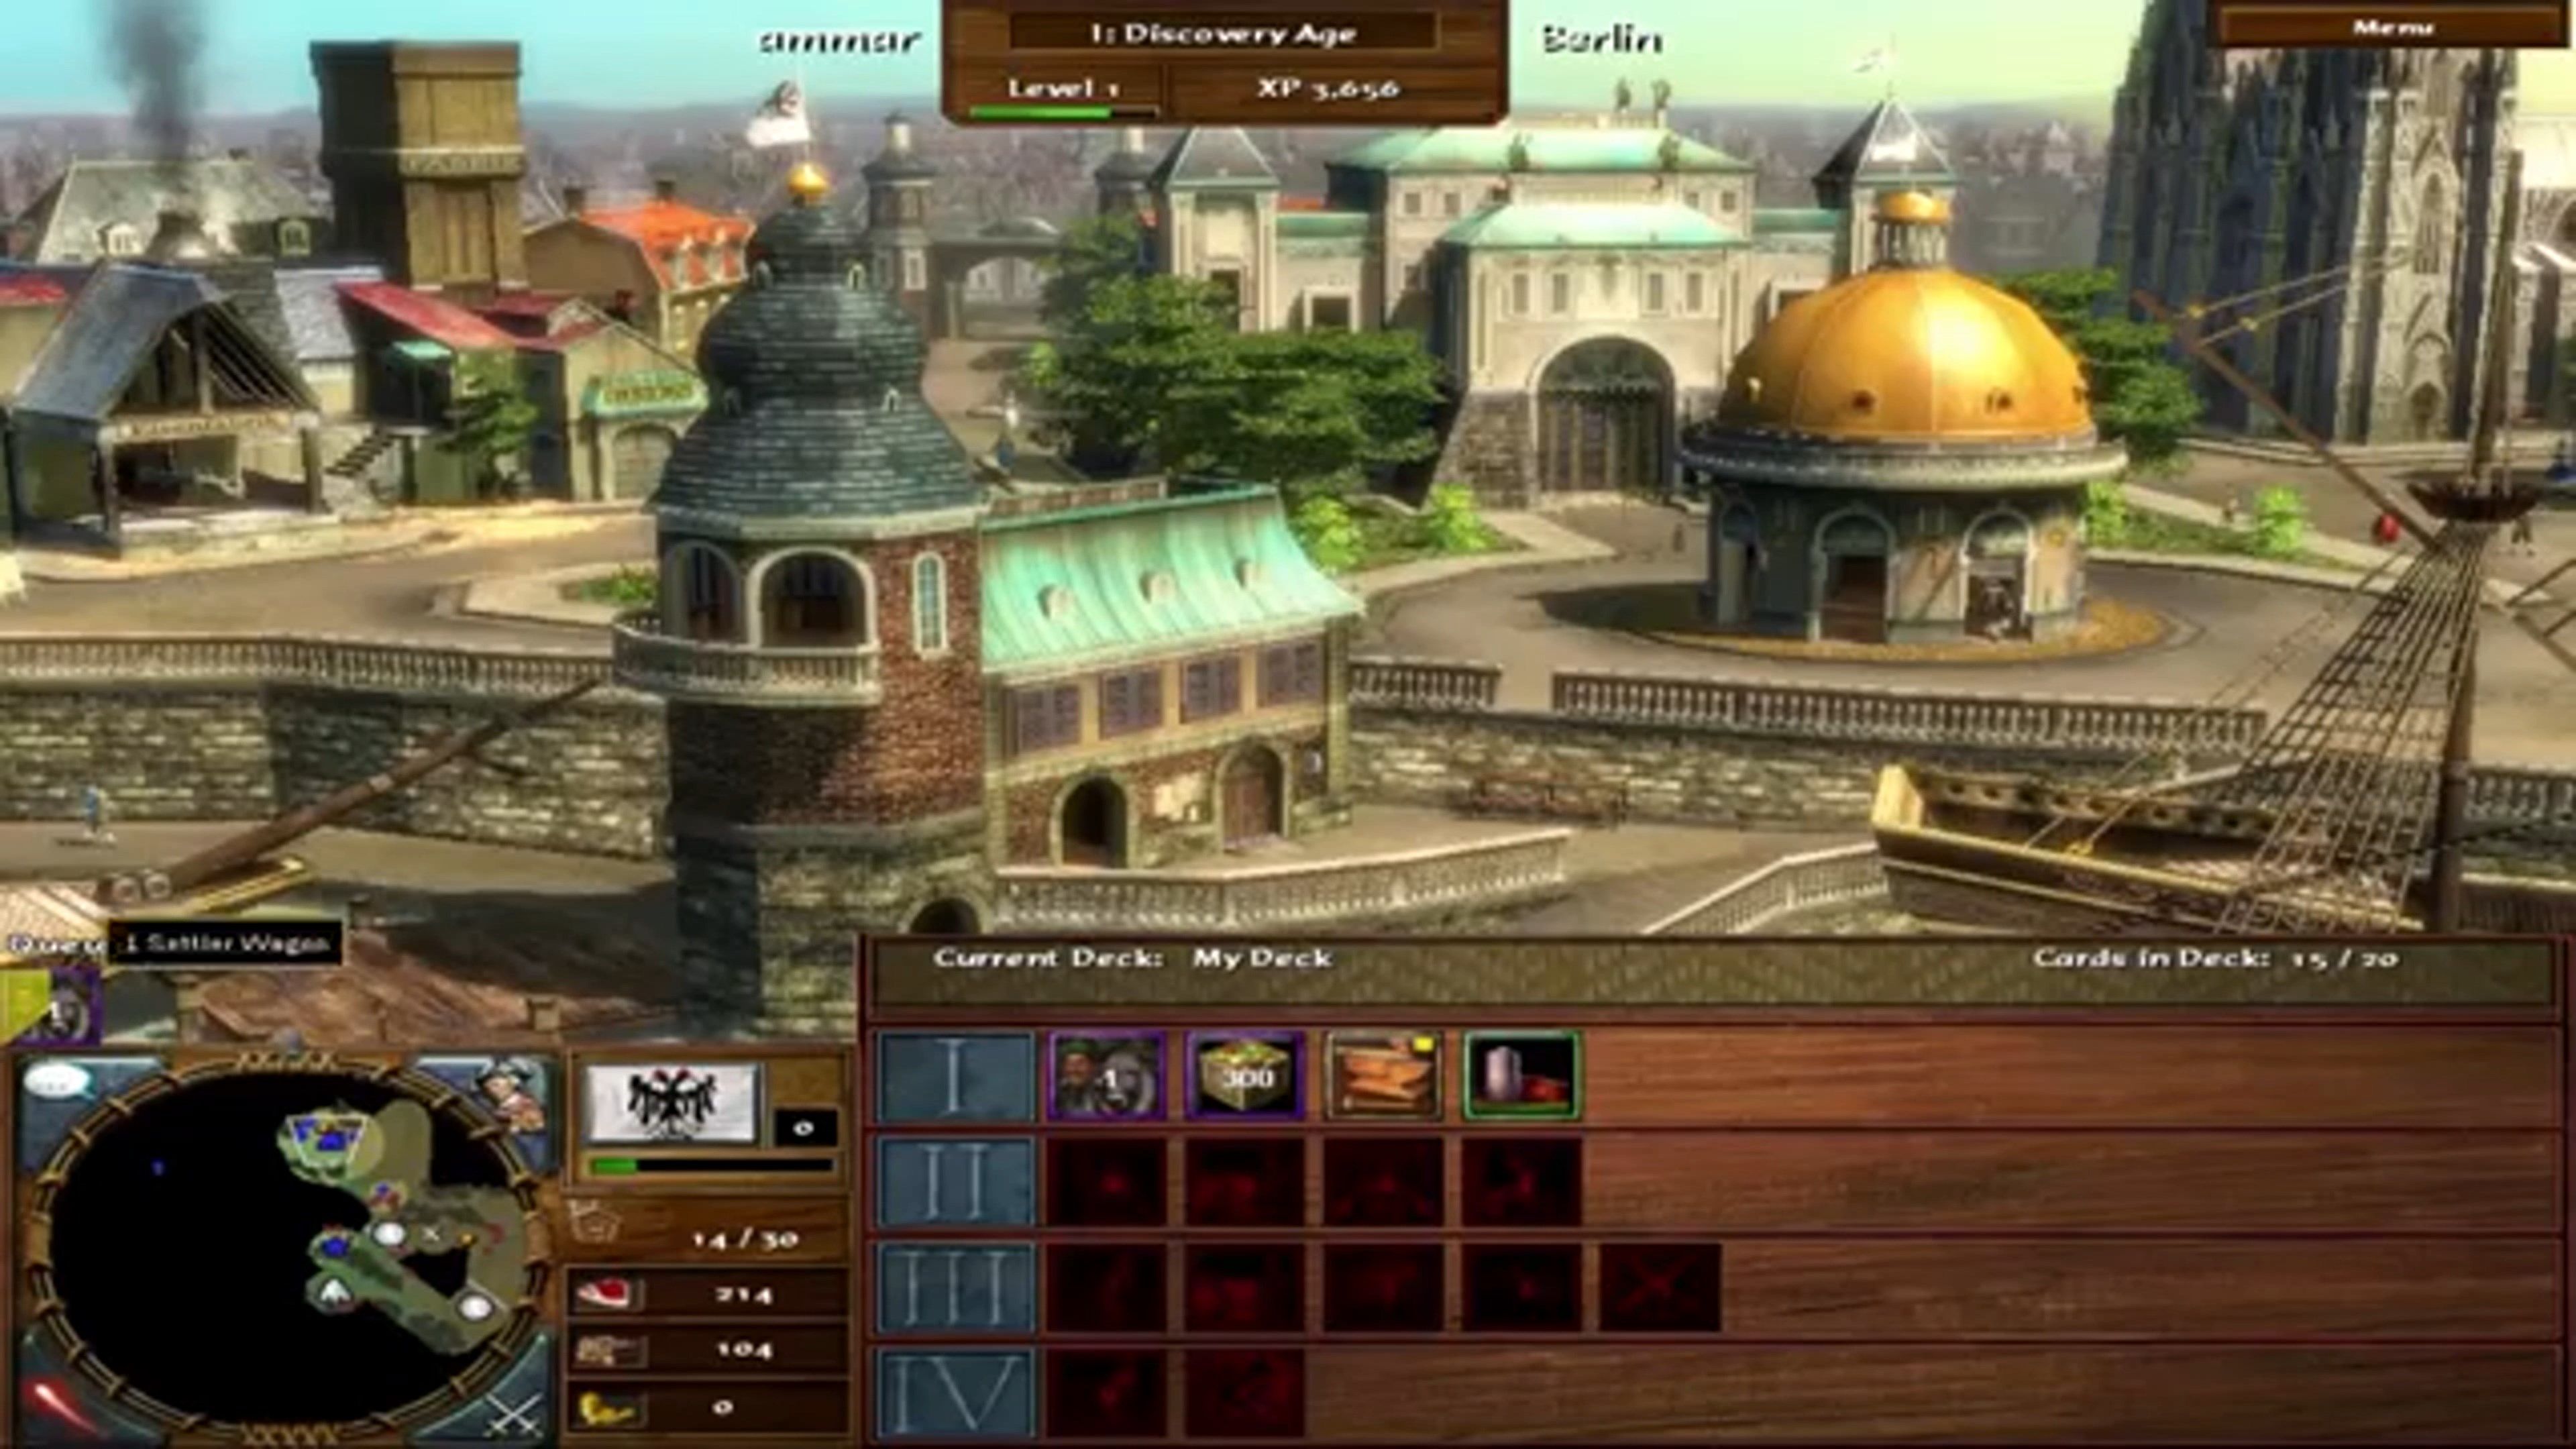 age of empires 3 free download full game for pc with crack